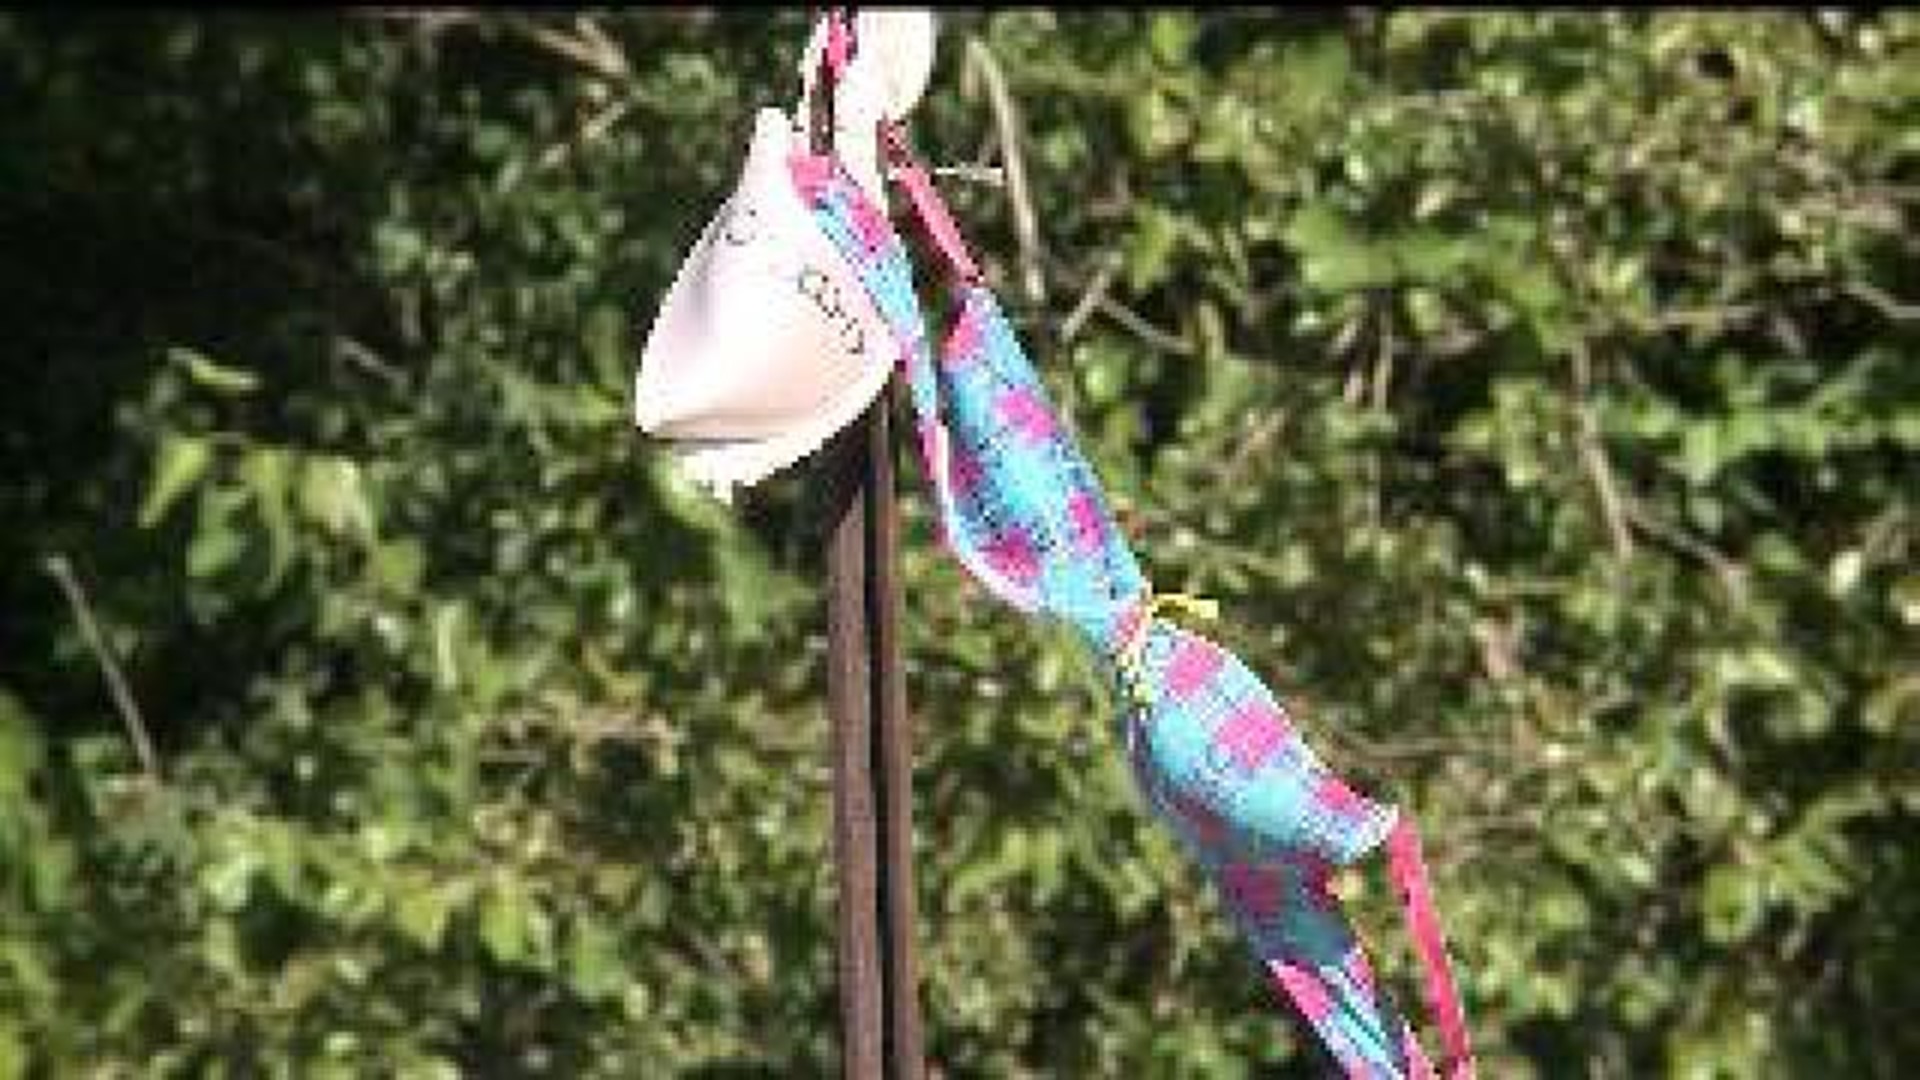 Loved ones hang unusual decoration to raise cancer awareness